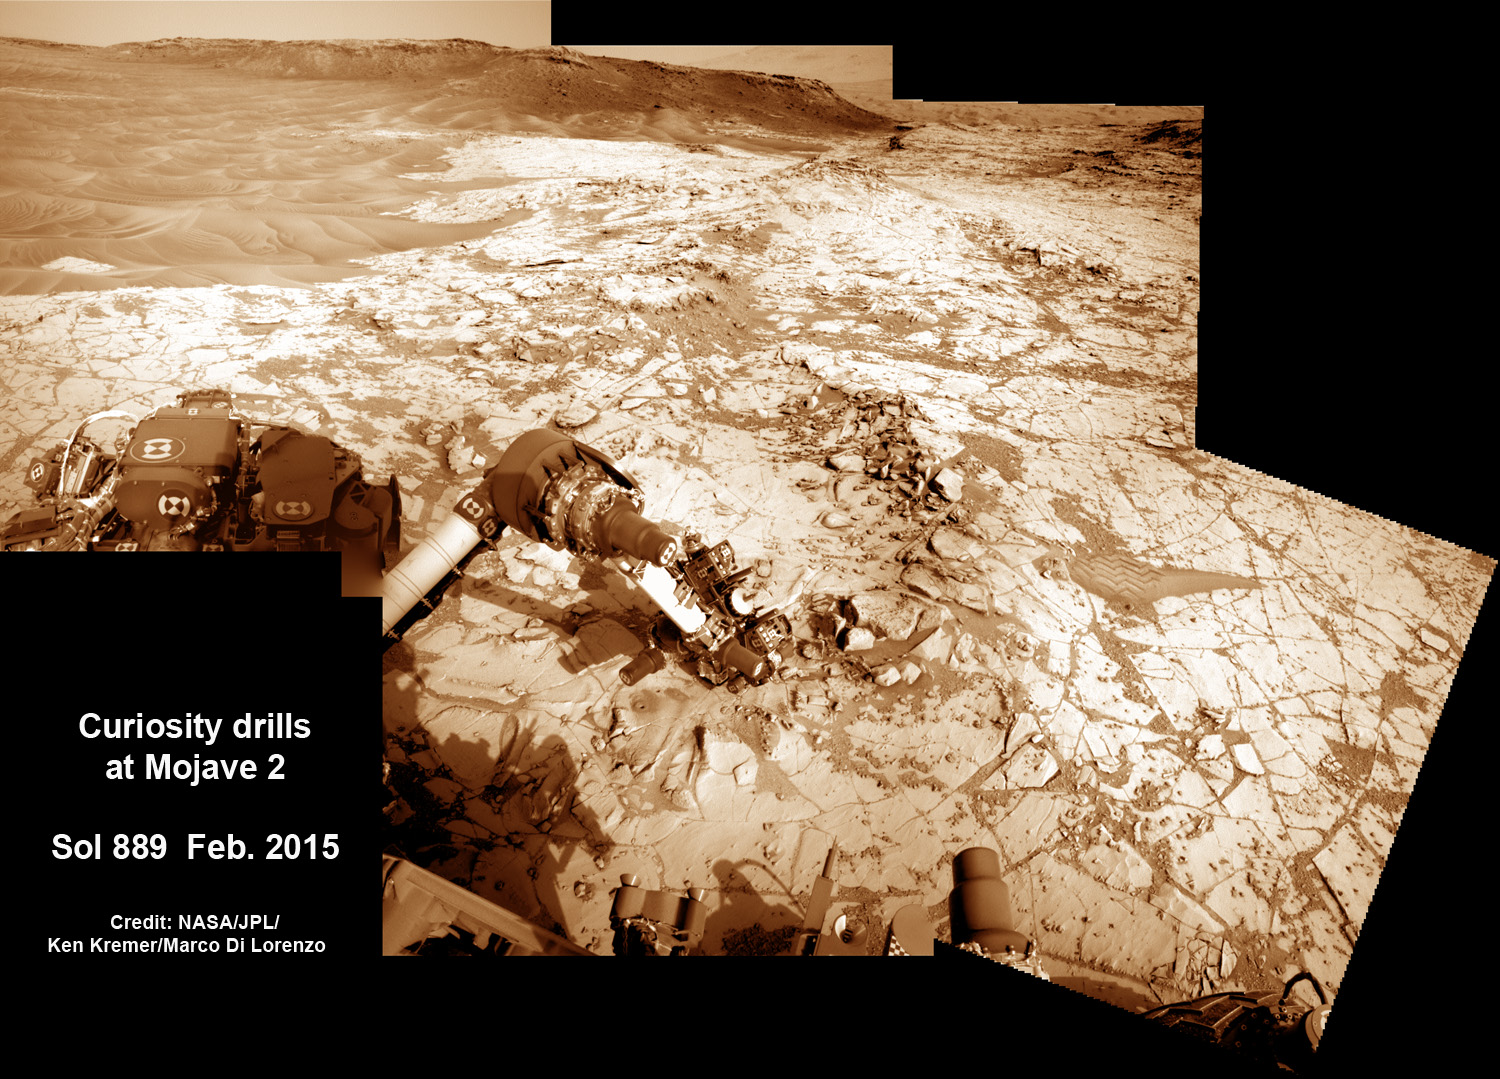 NASA’s Curiosity rover conducts 5th Martian sample drilling campaign at “Mojave 2” rock target in this composite photo mosaic from Sols 864 to 889 showing the robotic arm deployed on Sol 889, Feb. 5, 2015 to the “Pink Cliffs" portion of the "Pahrump Hills" rock outcrop at the base of Mount Sharp, seen in the distance.  Arm stowed at left.  Navcam camera raw images stitched and colorized. Credit: NASA/JPL-Caltech/Ken Kremer/kenkremer.com/Marco Di Lorenzo